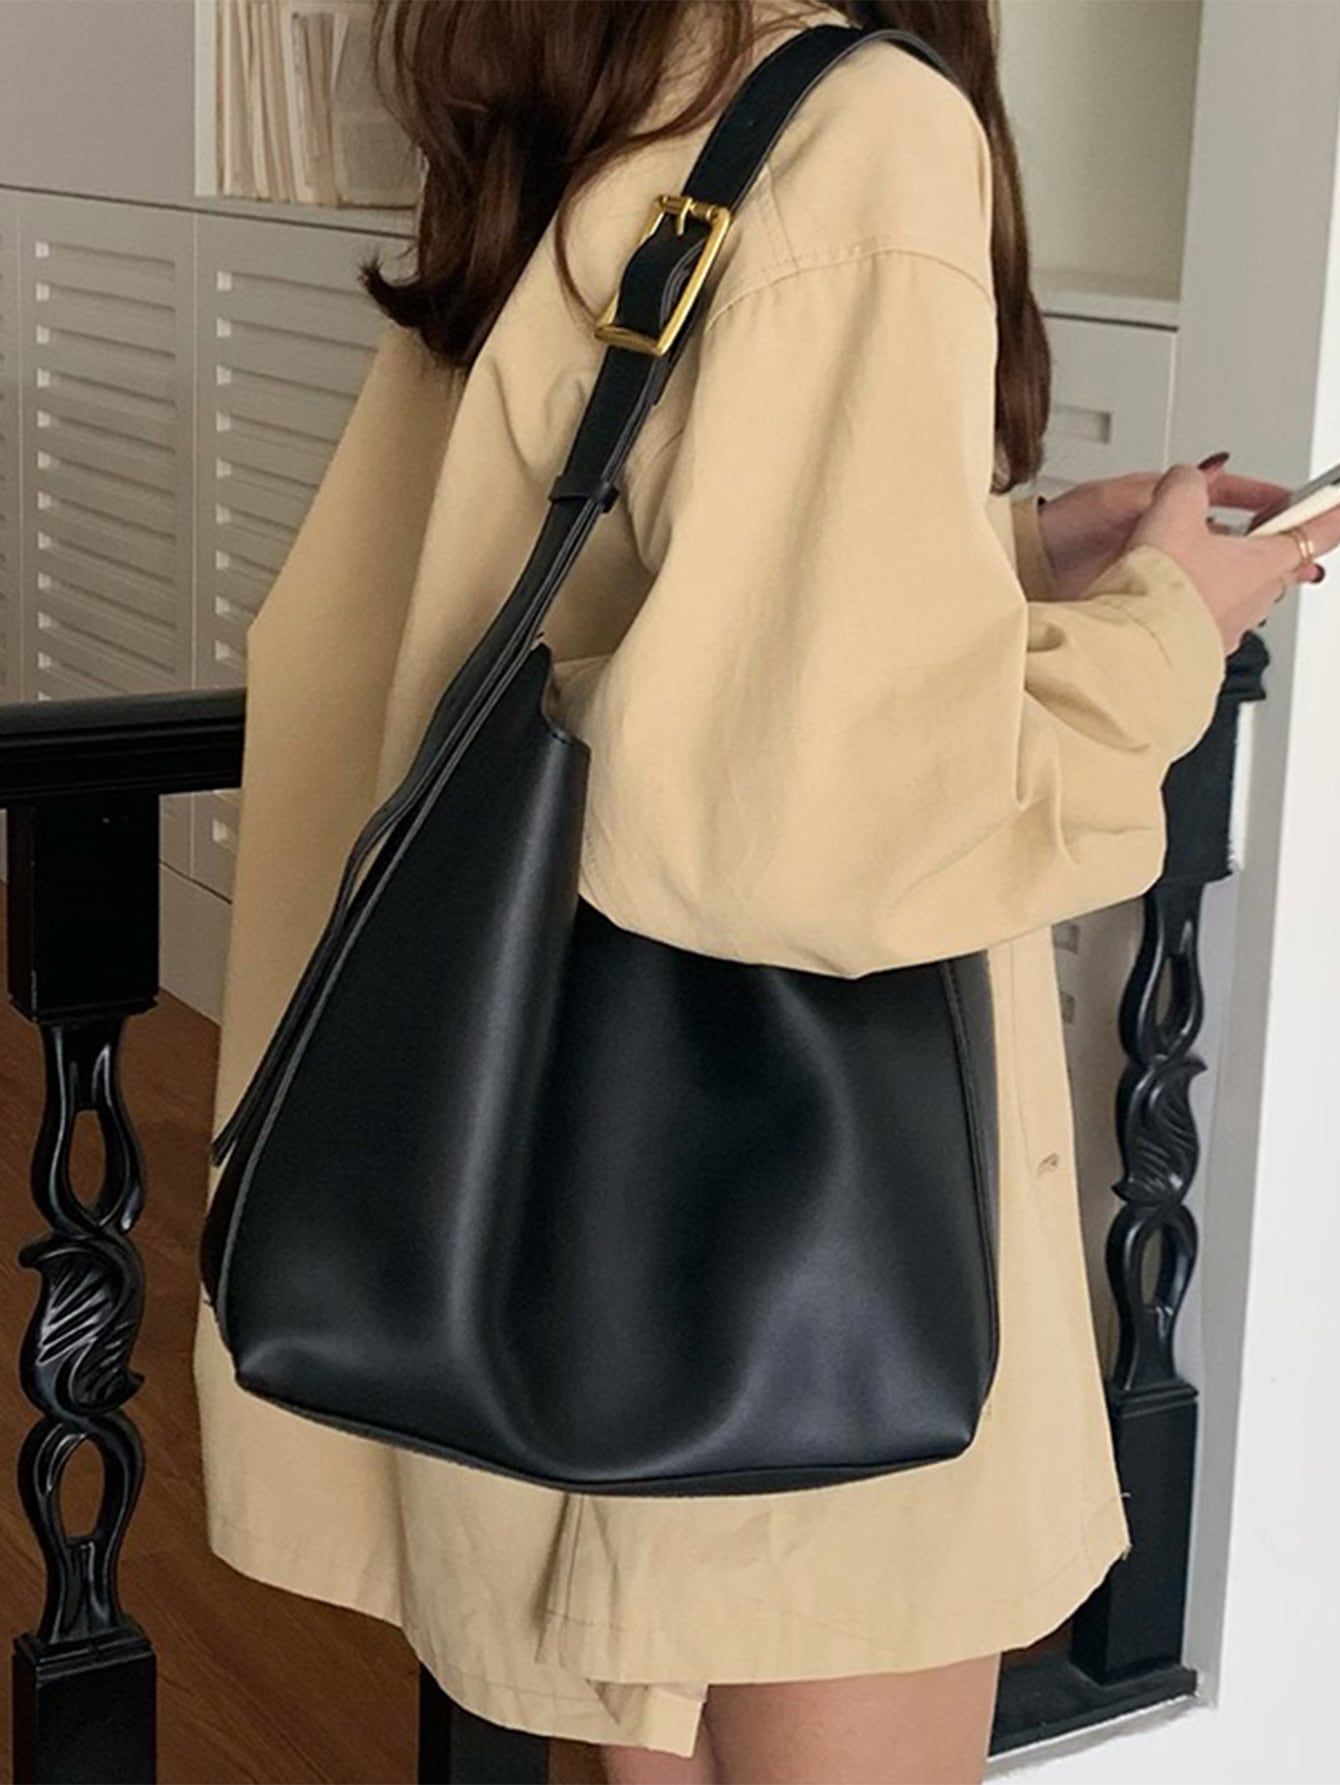 How to Wear Black Leather Purse: Top 15 Stylish Outfit Ideas for Ladies